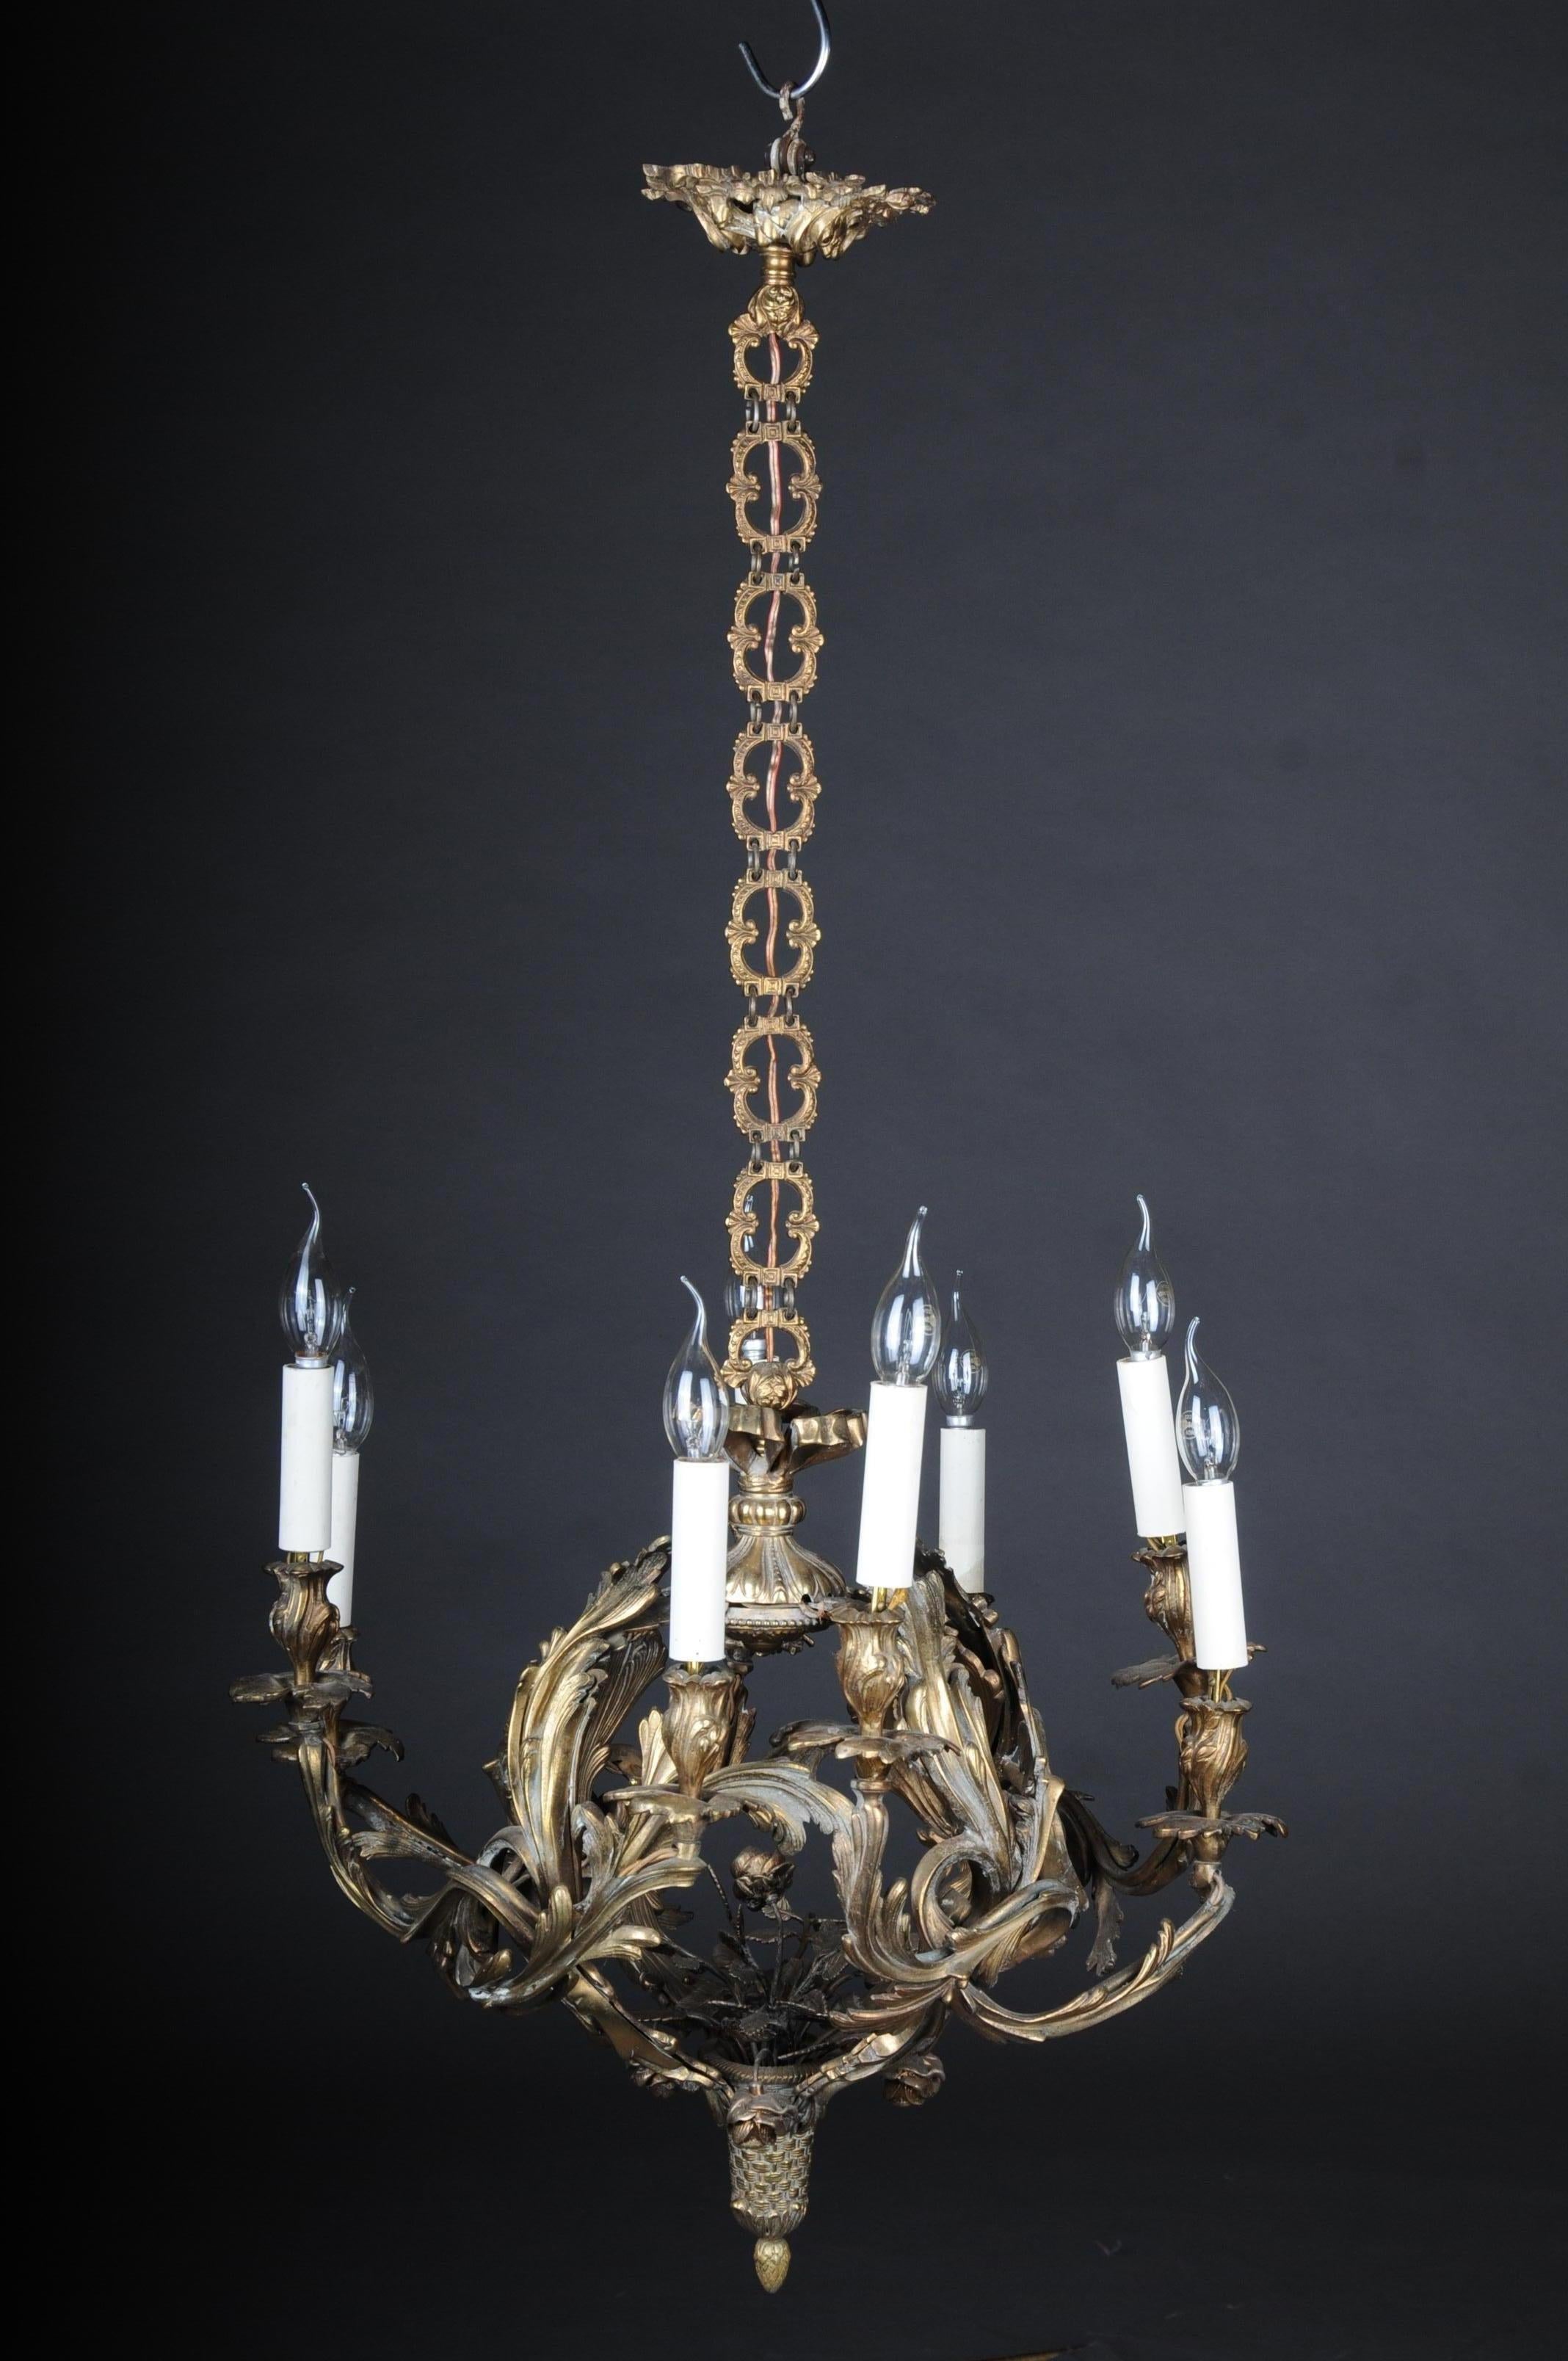 Antique bronze crown / chandelier Rococo, circa 1900

Solid, beautifully chased bronze body, gold-plated. Heavily decorated baluster shaft, starting with eight volute-like curved light arms. With electric candle shaft and sleeves. A very beautiful